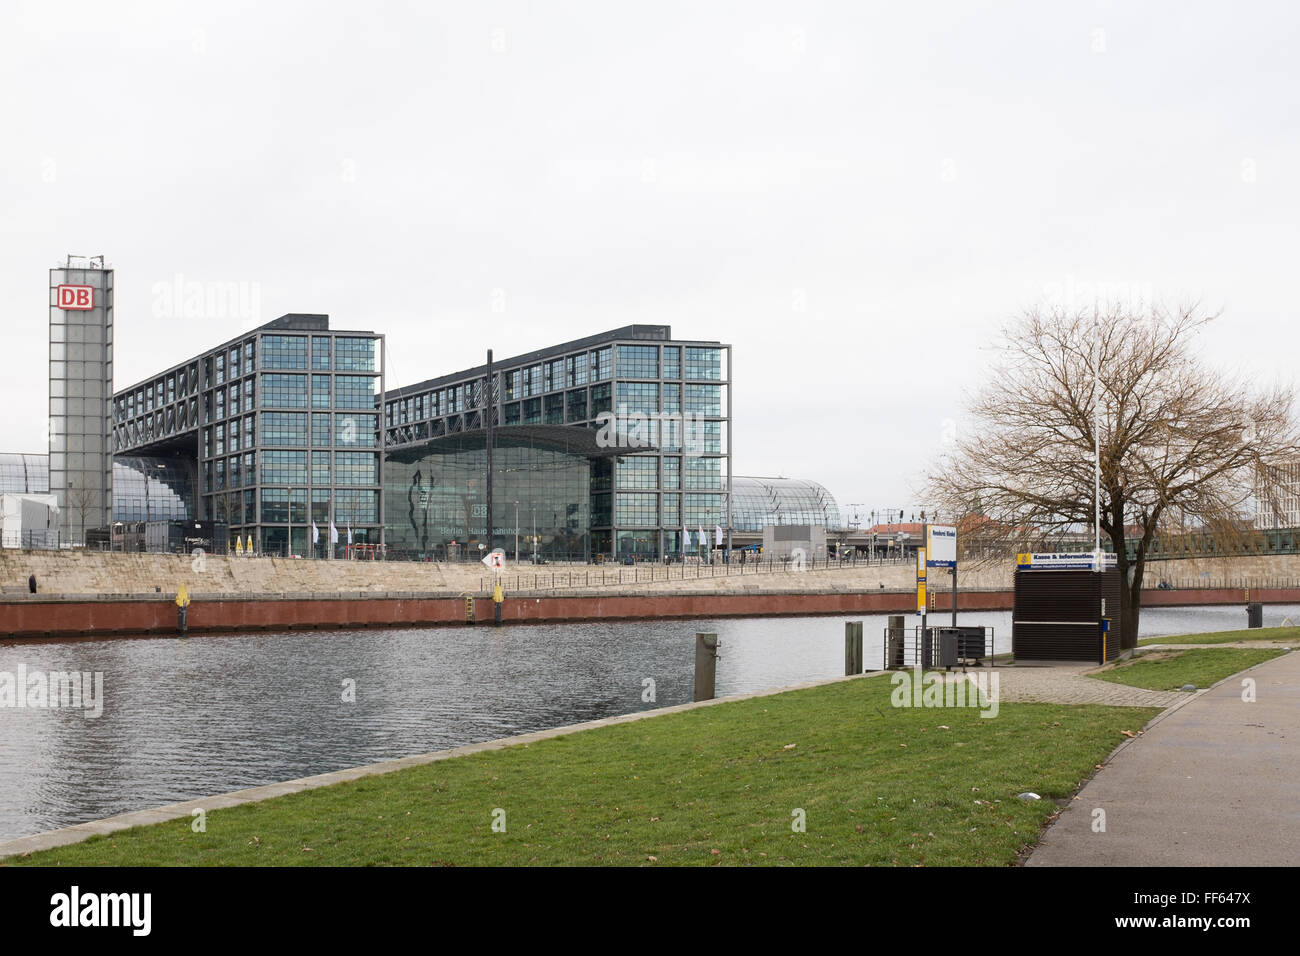 BERLIN - JANUARY 27: The 'Berlin Hauptbahnhof' (German for Mainstation) and the Spree river on January 27 2016 in Berlin. Stock Photo